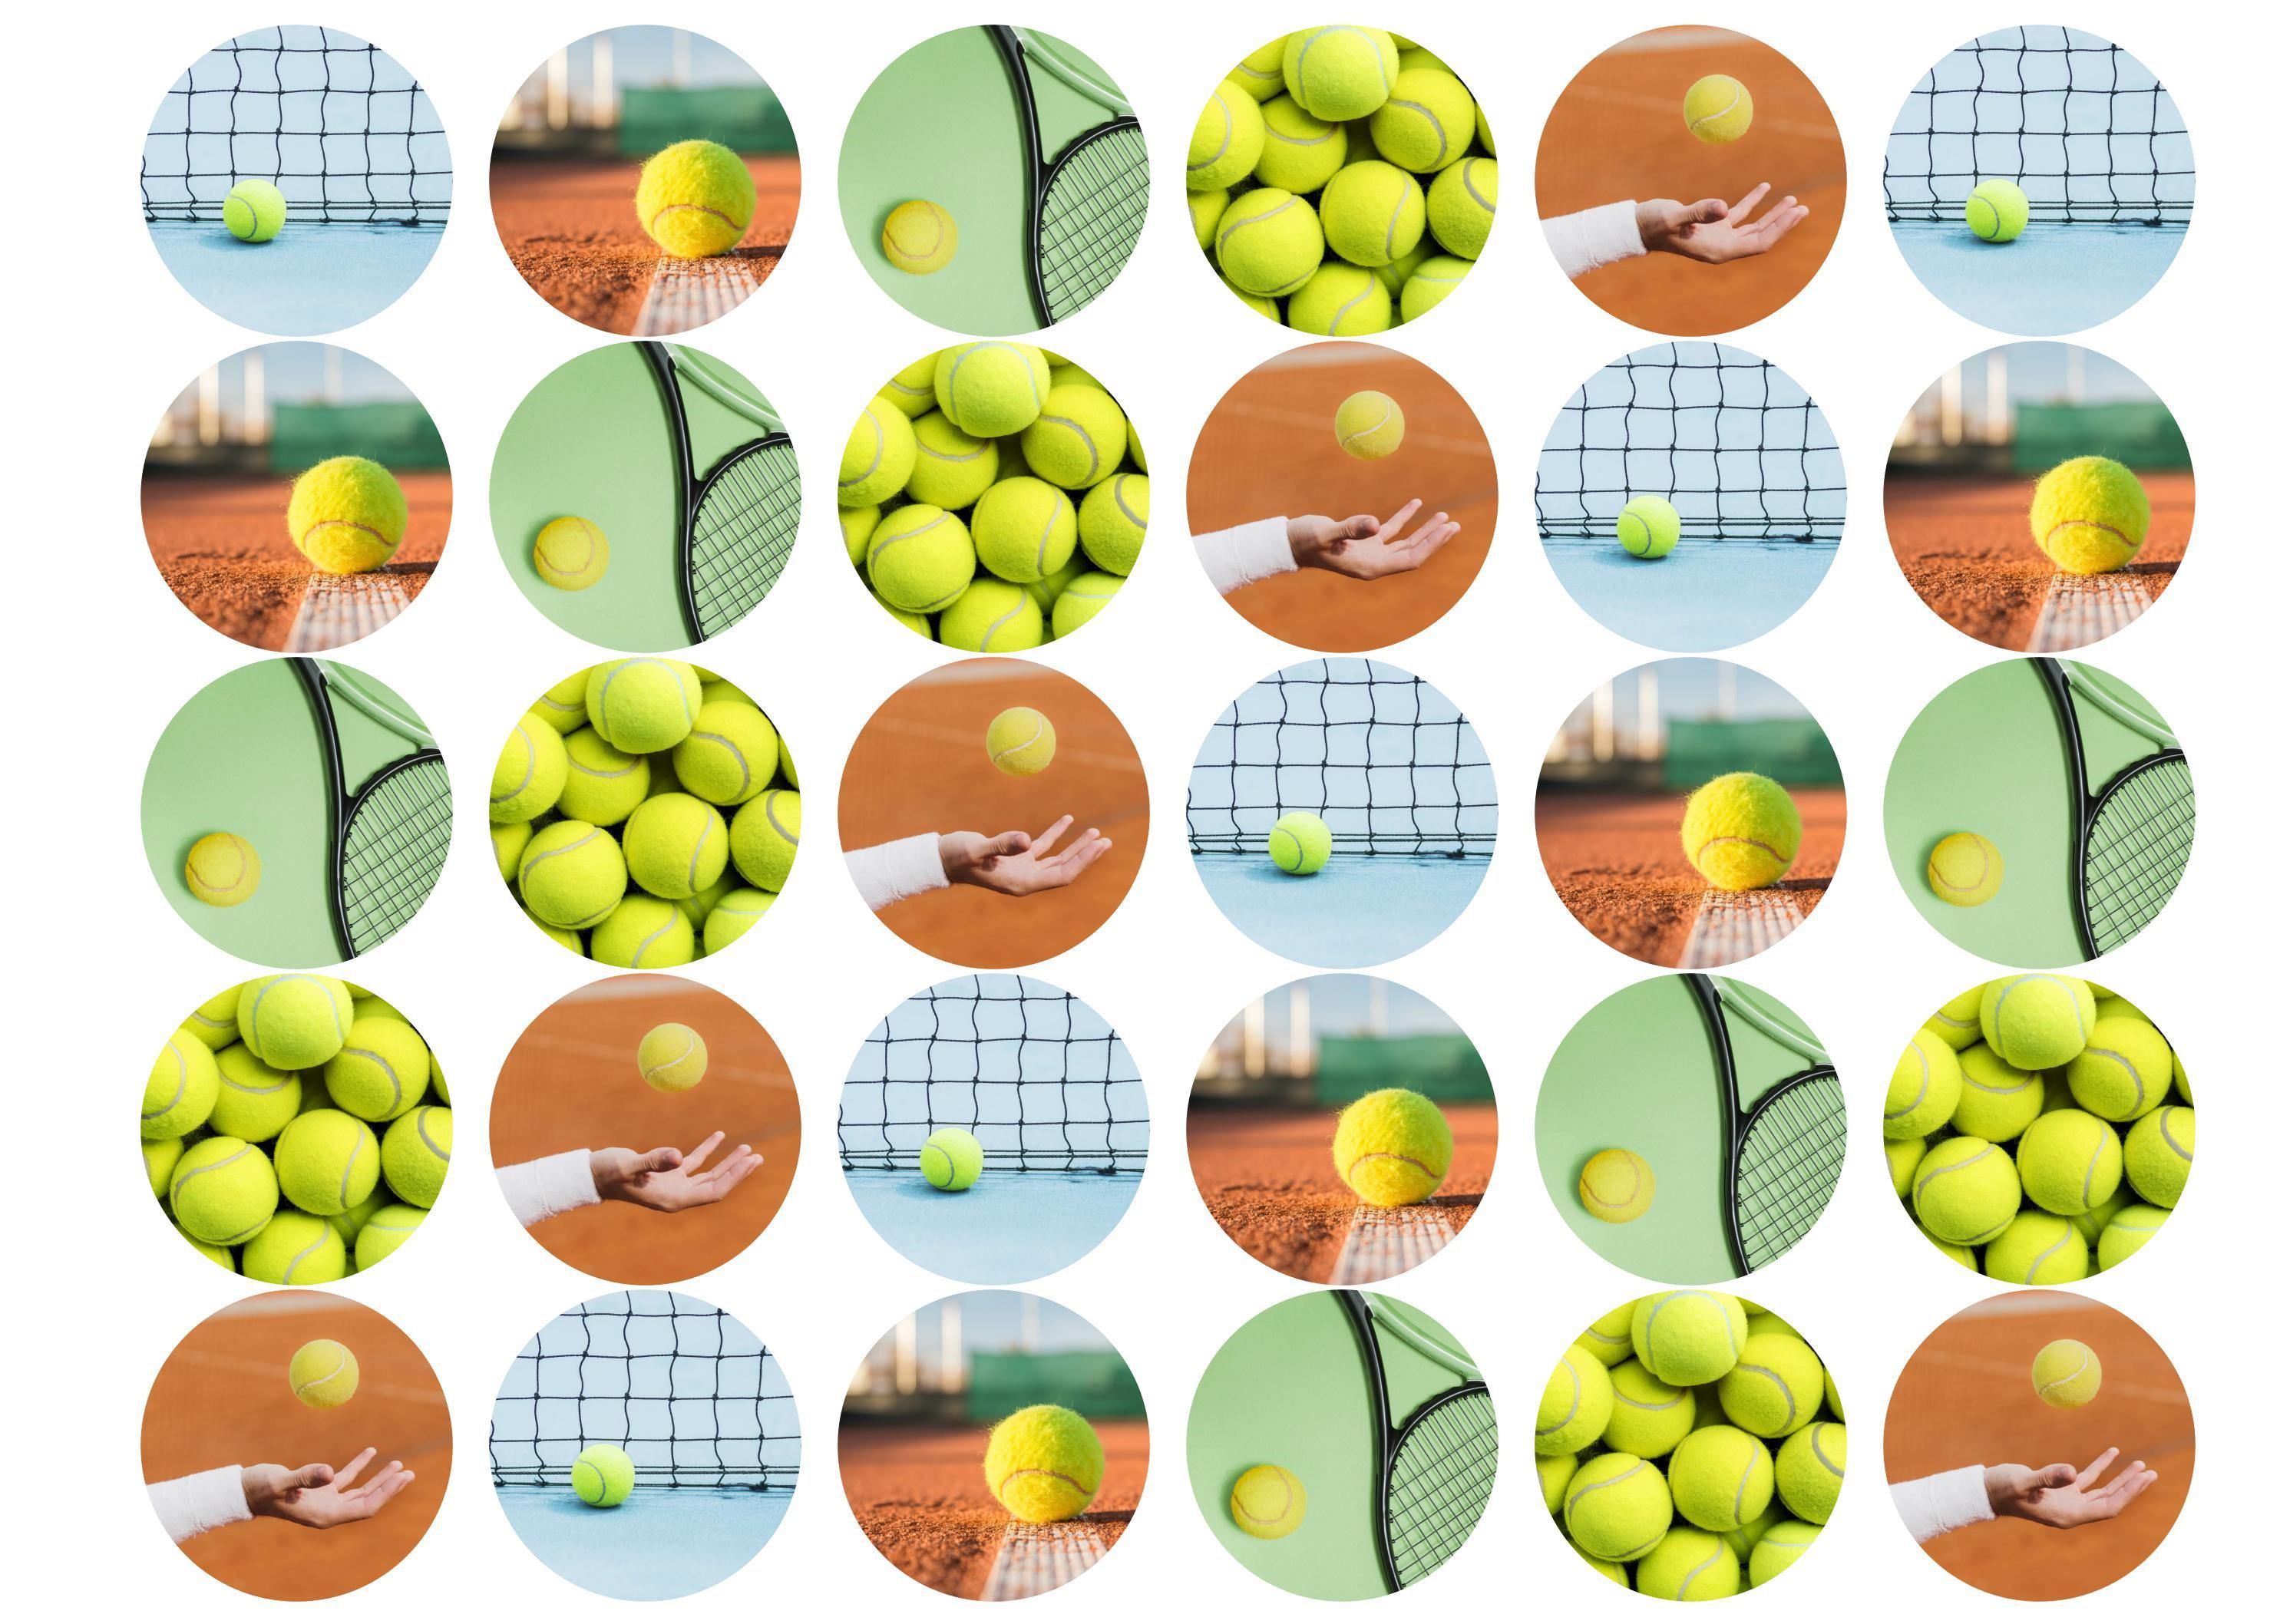 30 edible cupcake toppers with tennis equipment